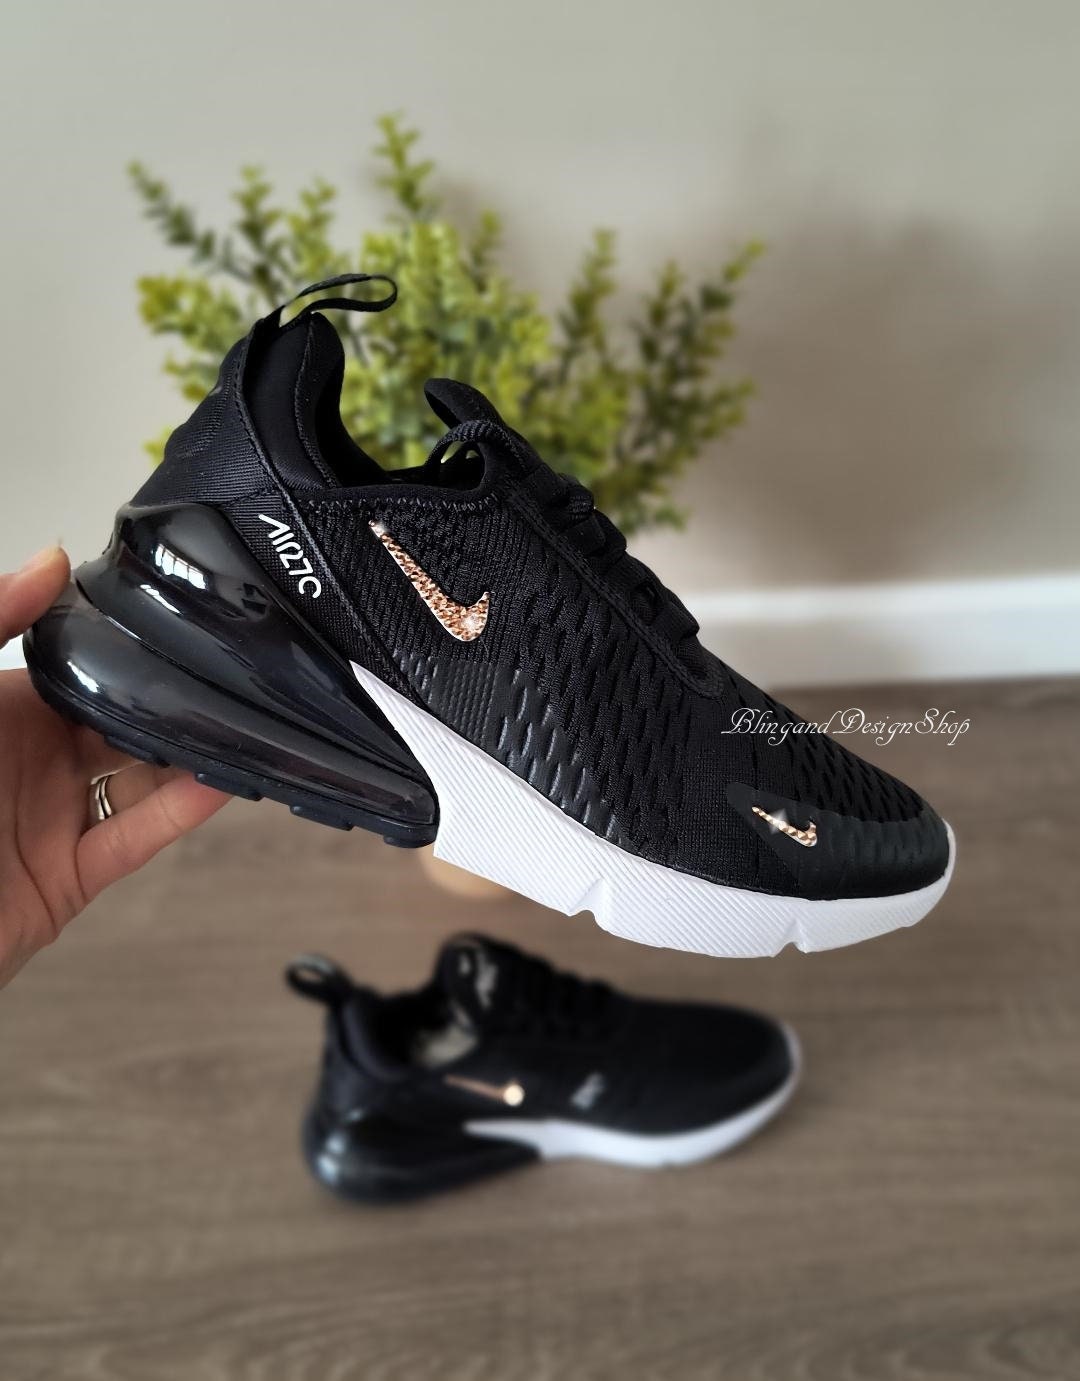 NIKE GIFTED ME NEW Women's Nike AIR MAX 270 React! Review and On Foot! 